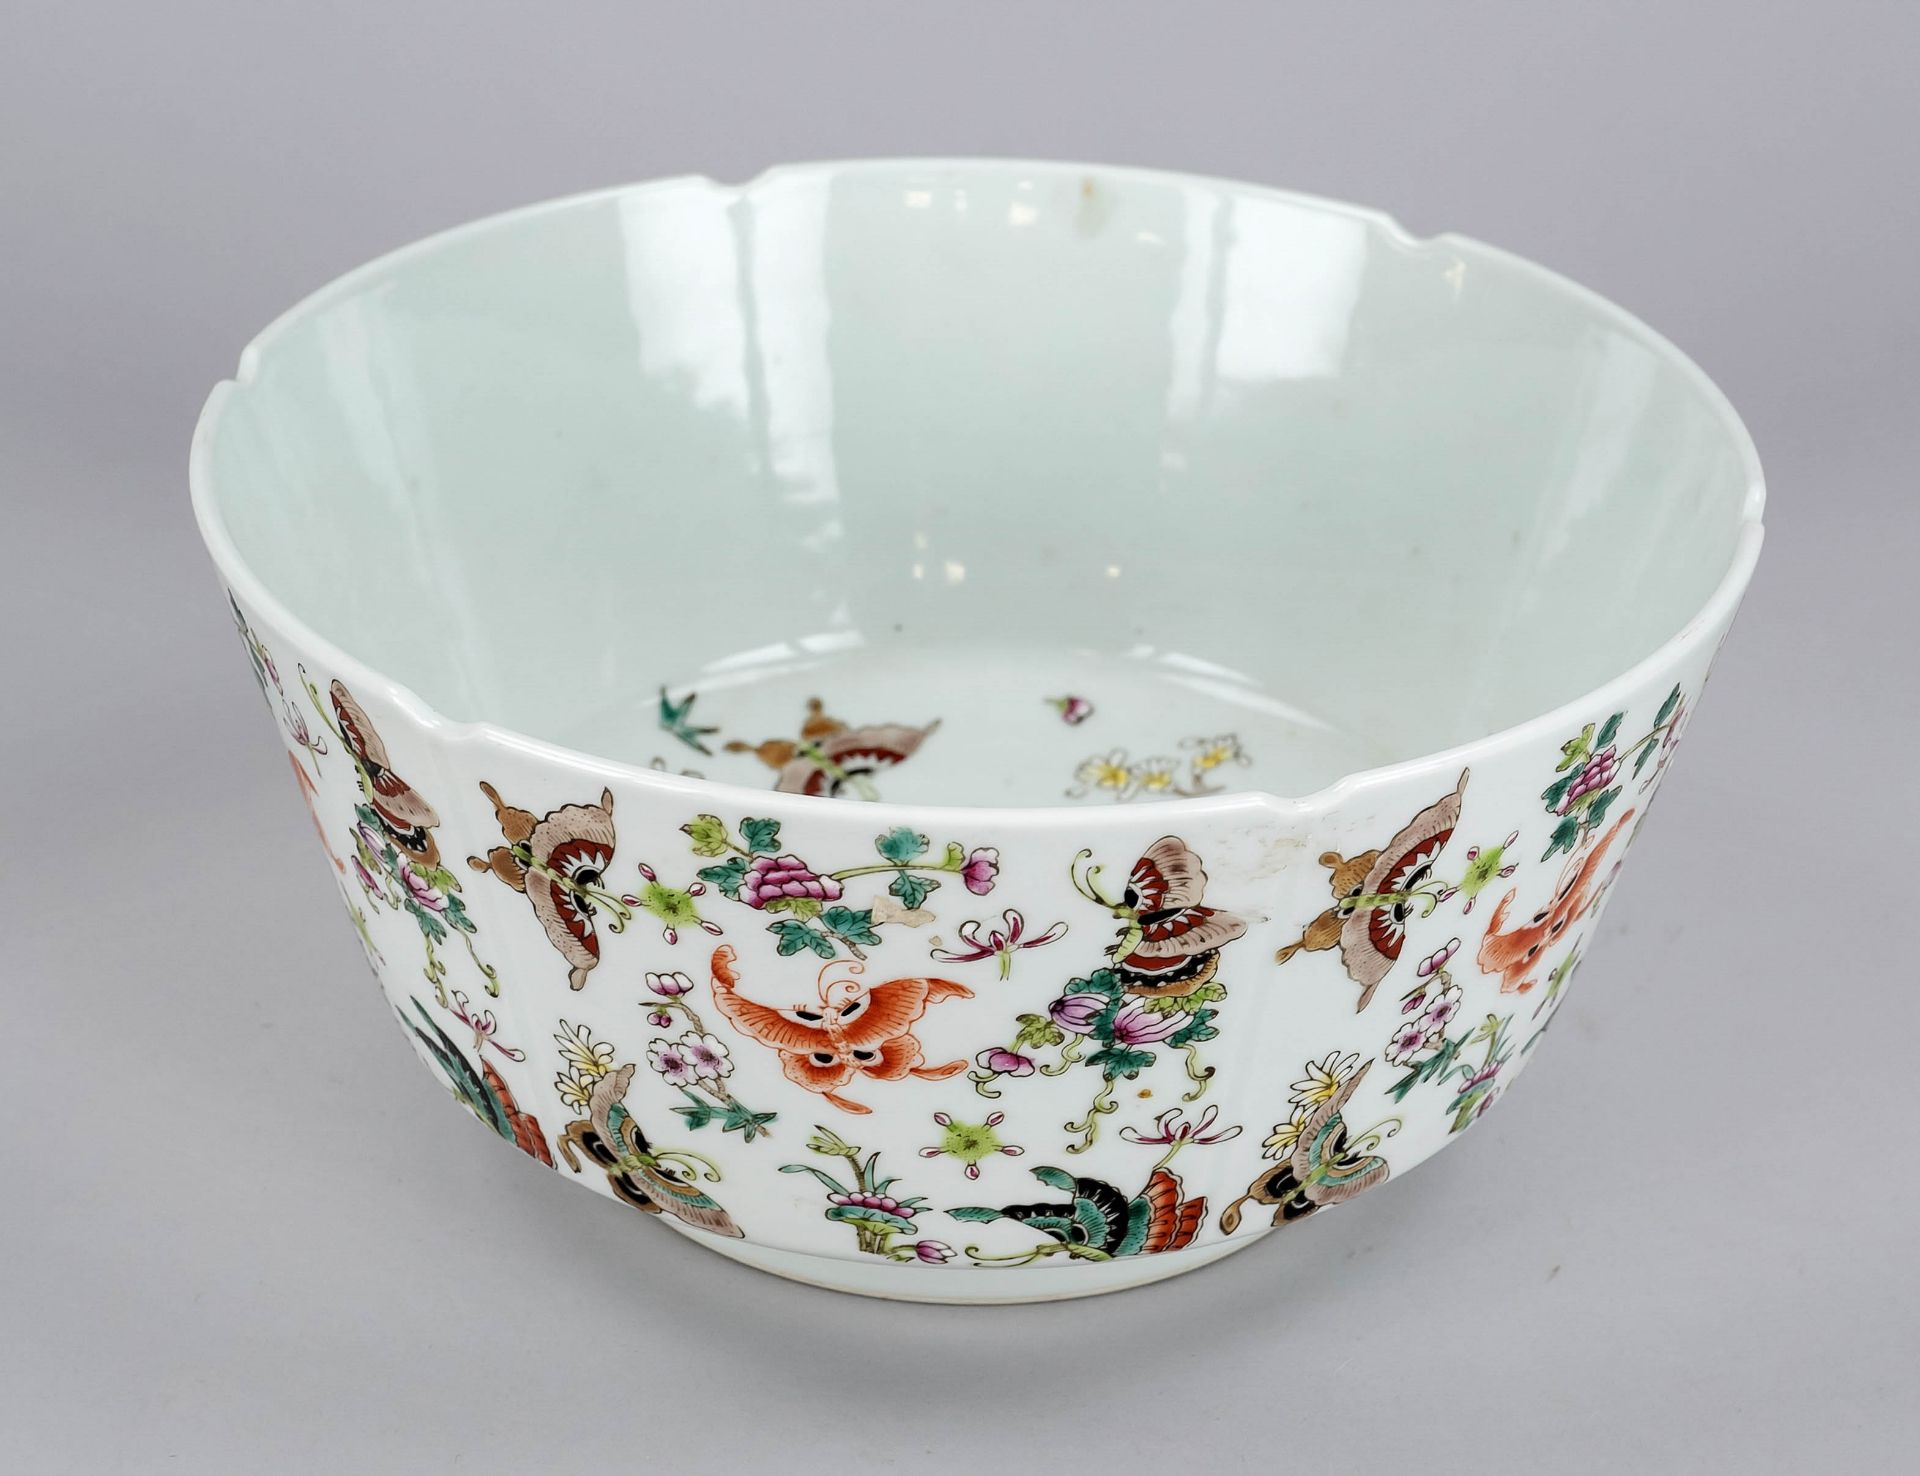 Large bowl, China, 20th c., porcelain with polychrome enamel decoration between flowers of